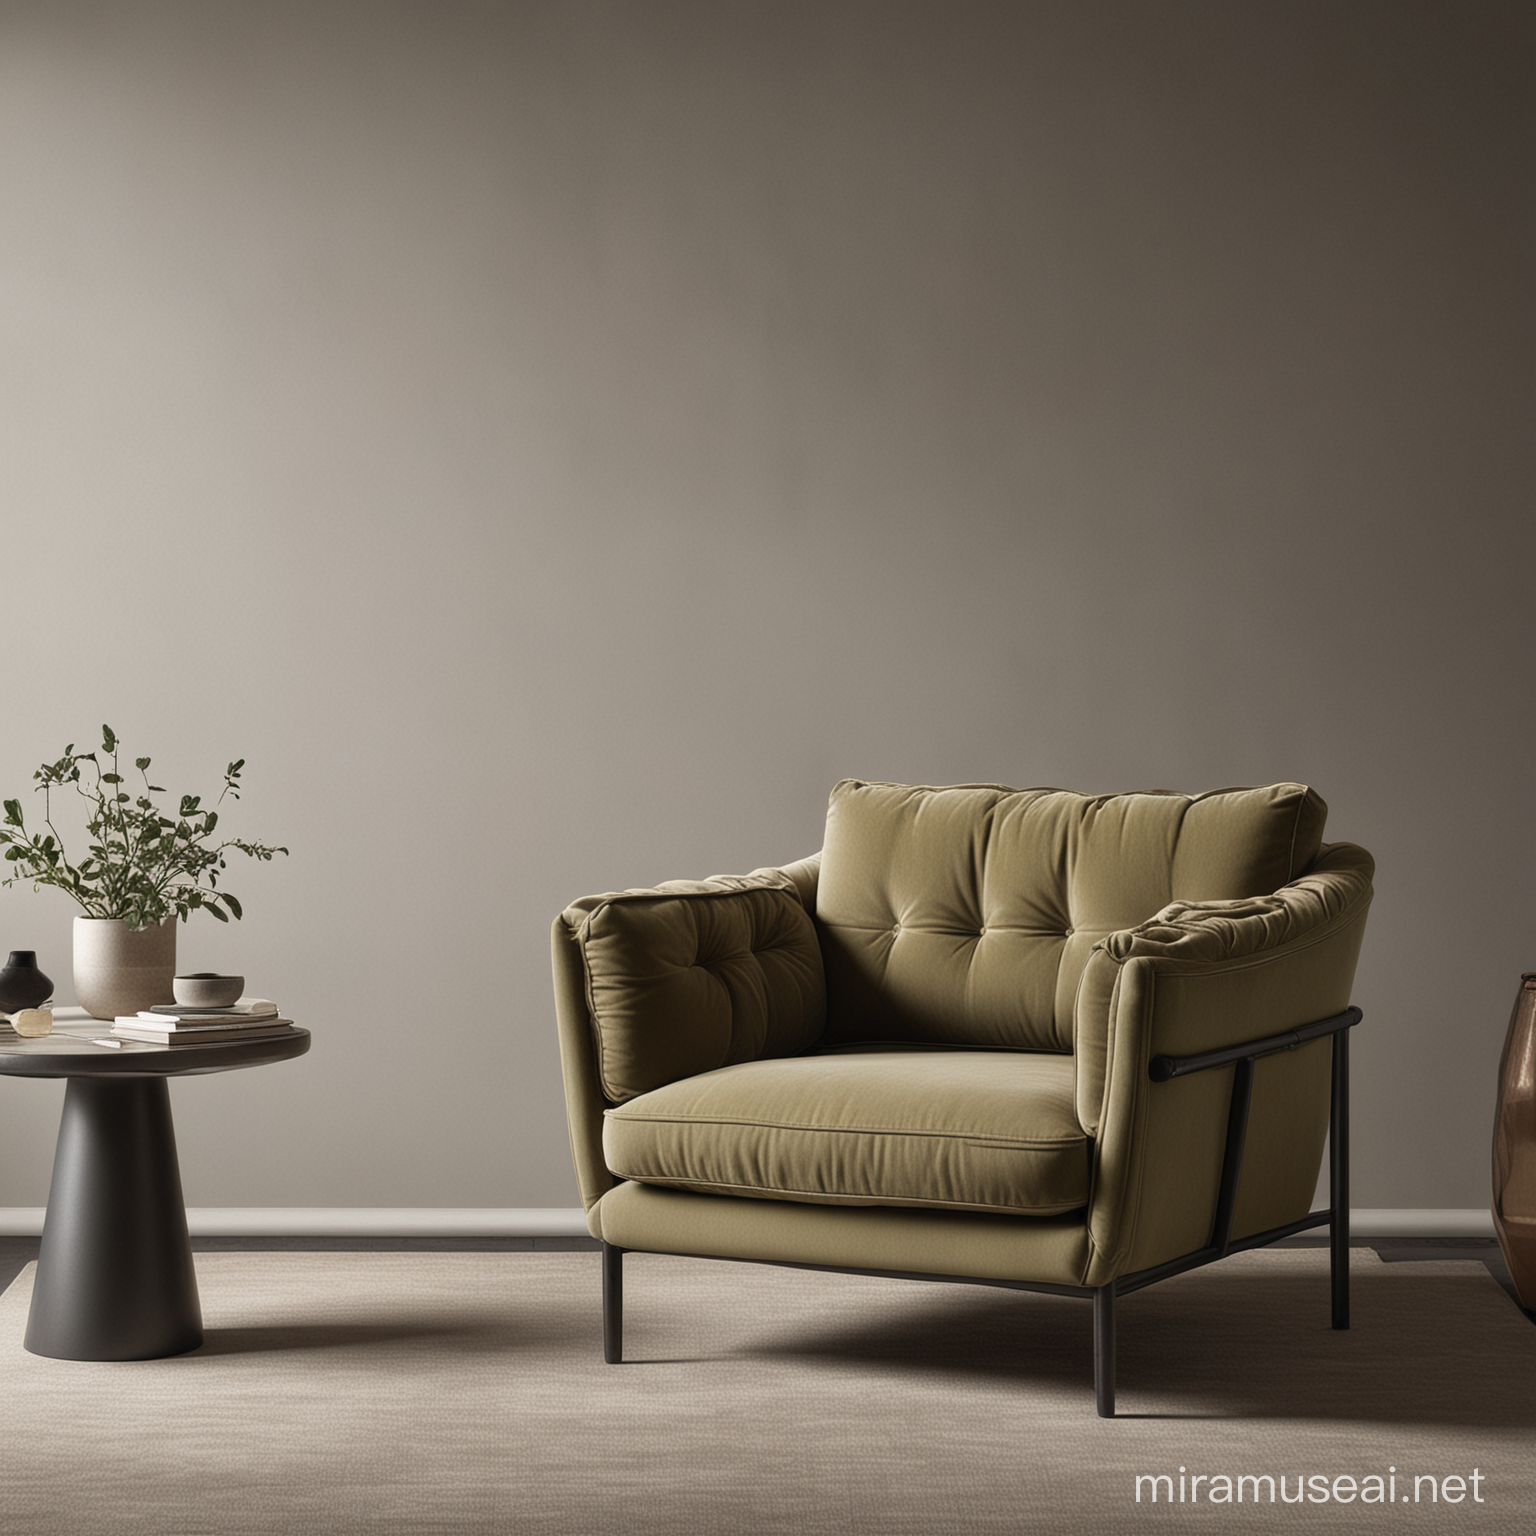 Organic Armchair Design in Anthracite and Khaki A Visual Homedecor Concept